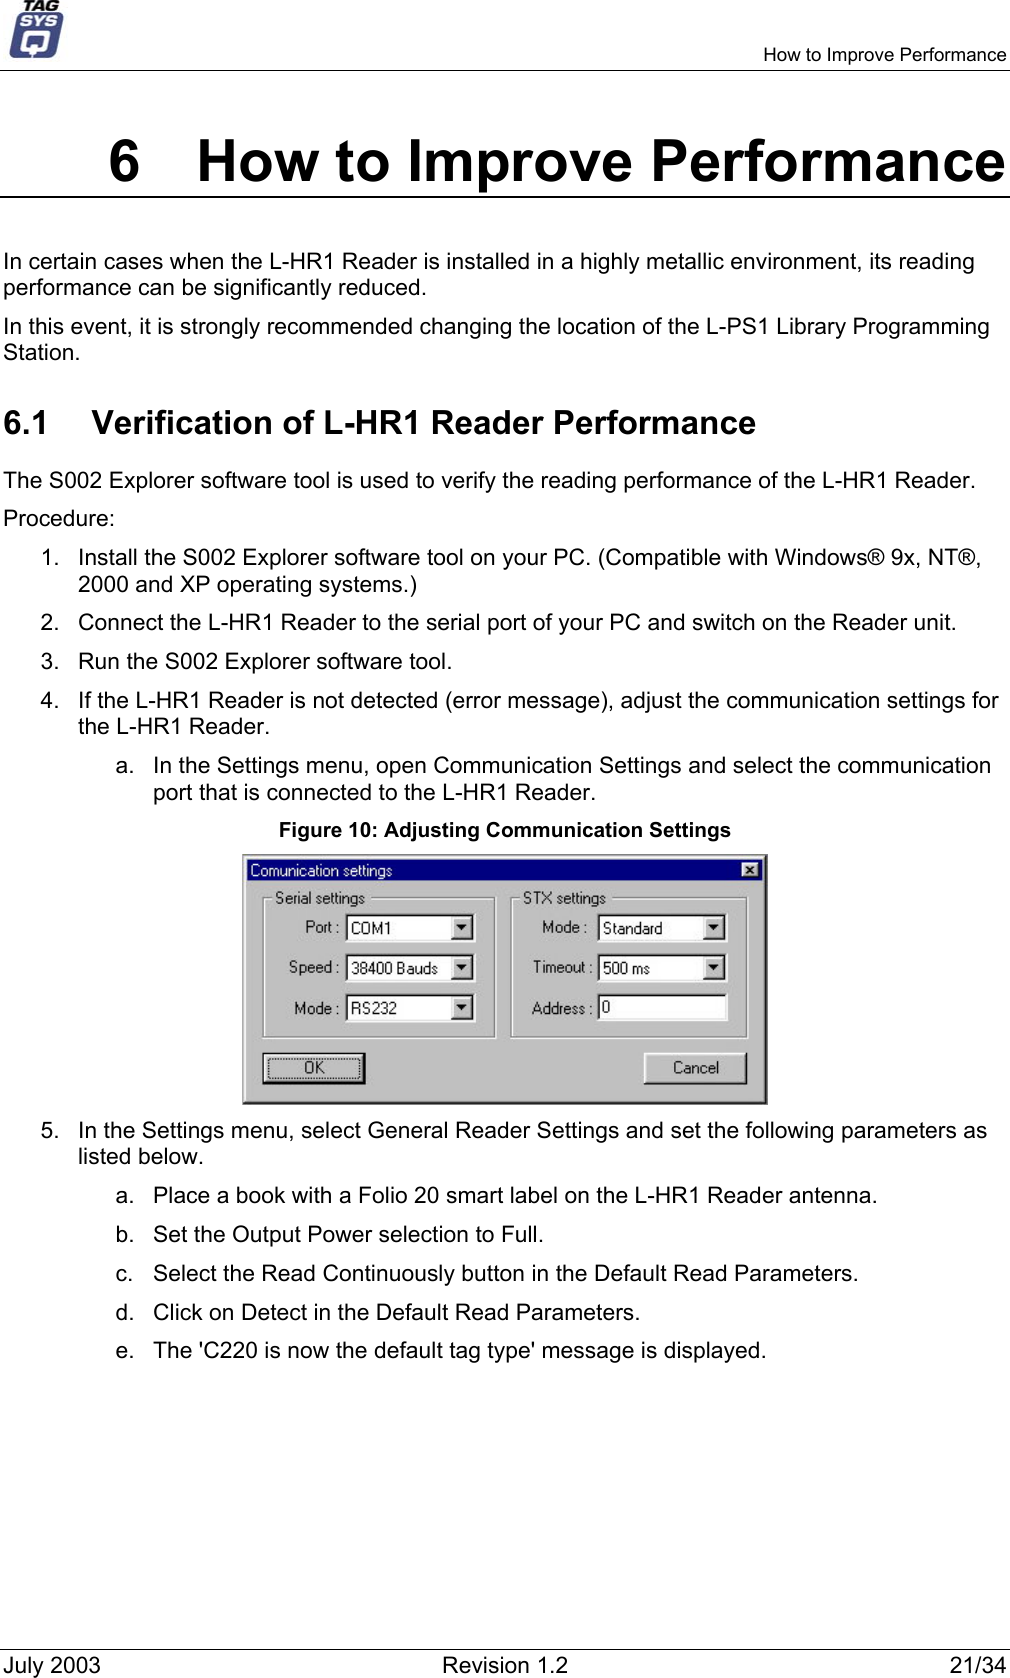     How to Improve Performance 6  How to Improve Performance In certain cases when the L-HR1 Reader is installed in a highly metallic environment, its reading performance can be significantly reduced.  In this event, it is strongly recommended changing the location of the L-PS1 Library Programming Station. 6.1  Verification of L-HR1 Reader Performance The S002 Explorer software tool is used to verify the reading performance of the L-HR1 Reader. Procedure: 1.  Install the S002 Explorer software tool on your PC. (Compatible with Windows® 9x, NT®, 2000 and XP operating systems.) 2.  Connect the L-HR1 Reader to the serial port of your PC and switch on the Reader unit. 3.  Run the S002 Explorer software tool. 4.  If the L-HR1 Reader is not detected (error message), adjust the communication settings for the L-HR1 Reader. a.  In the Settings menu, open Communication Settings and select the communication port that is connected to the L-HR1 Reader. Figure 10: Adjusting Communication Settings  5.  In the Settings menu, select General Reader Settings and set the following parameters as listed below. a.  Place a book with a Folio 20 smart label on the L-HR1 Reader antenna. b.  Set the Output Power selection to Full. c.  Select the Read Continuously button in the Default Read Parameters. d.  Click on Detect in the Default Read Parameters. e.  The &apos;C220 is now the default tag type&apos; message is displayed. July 2003  Revision 1.2  21/34 